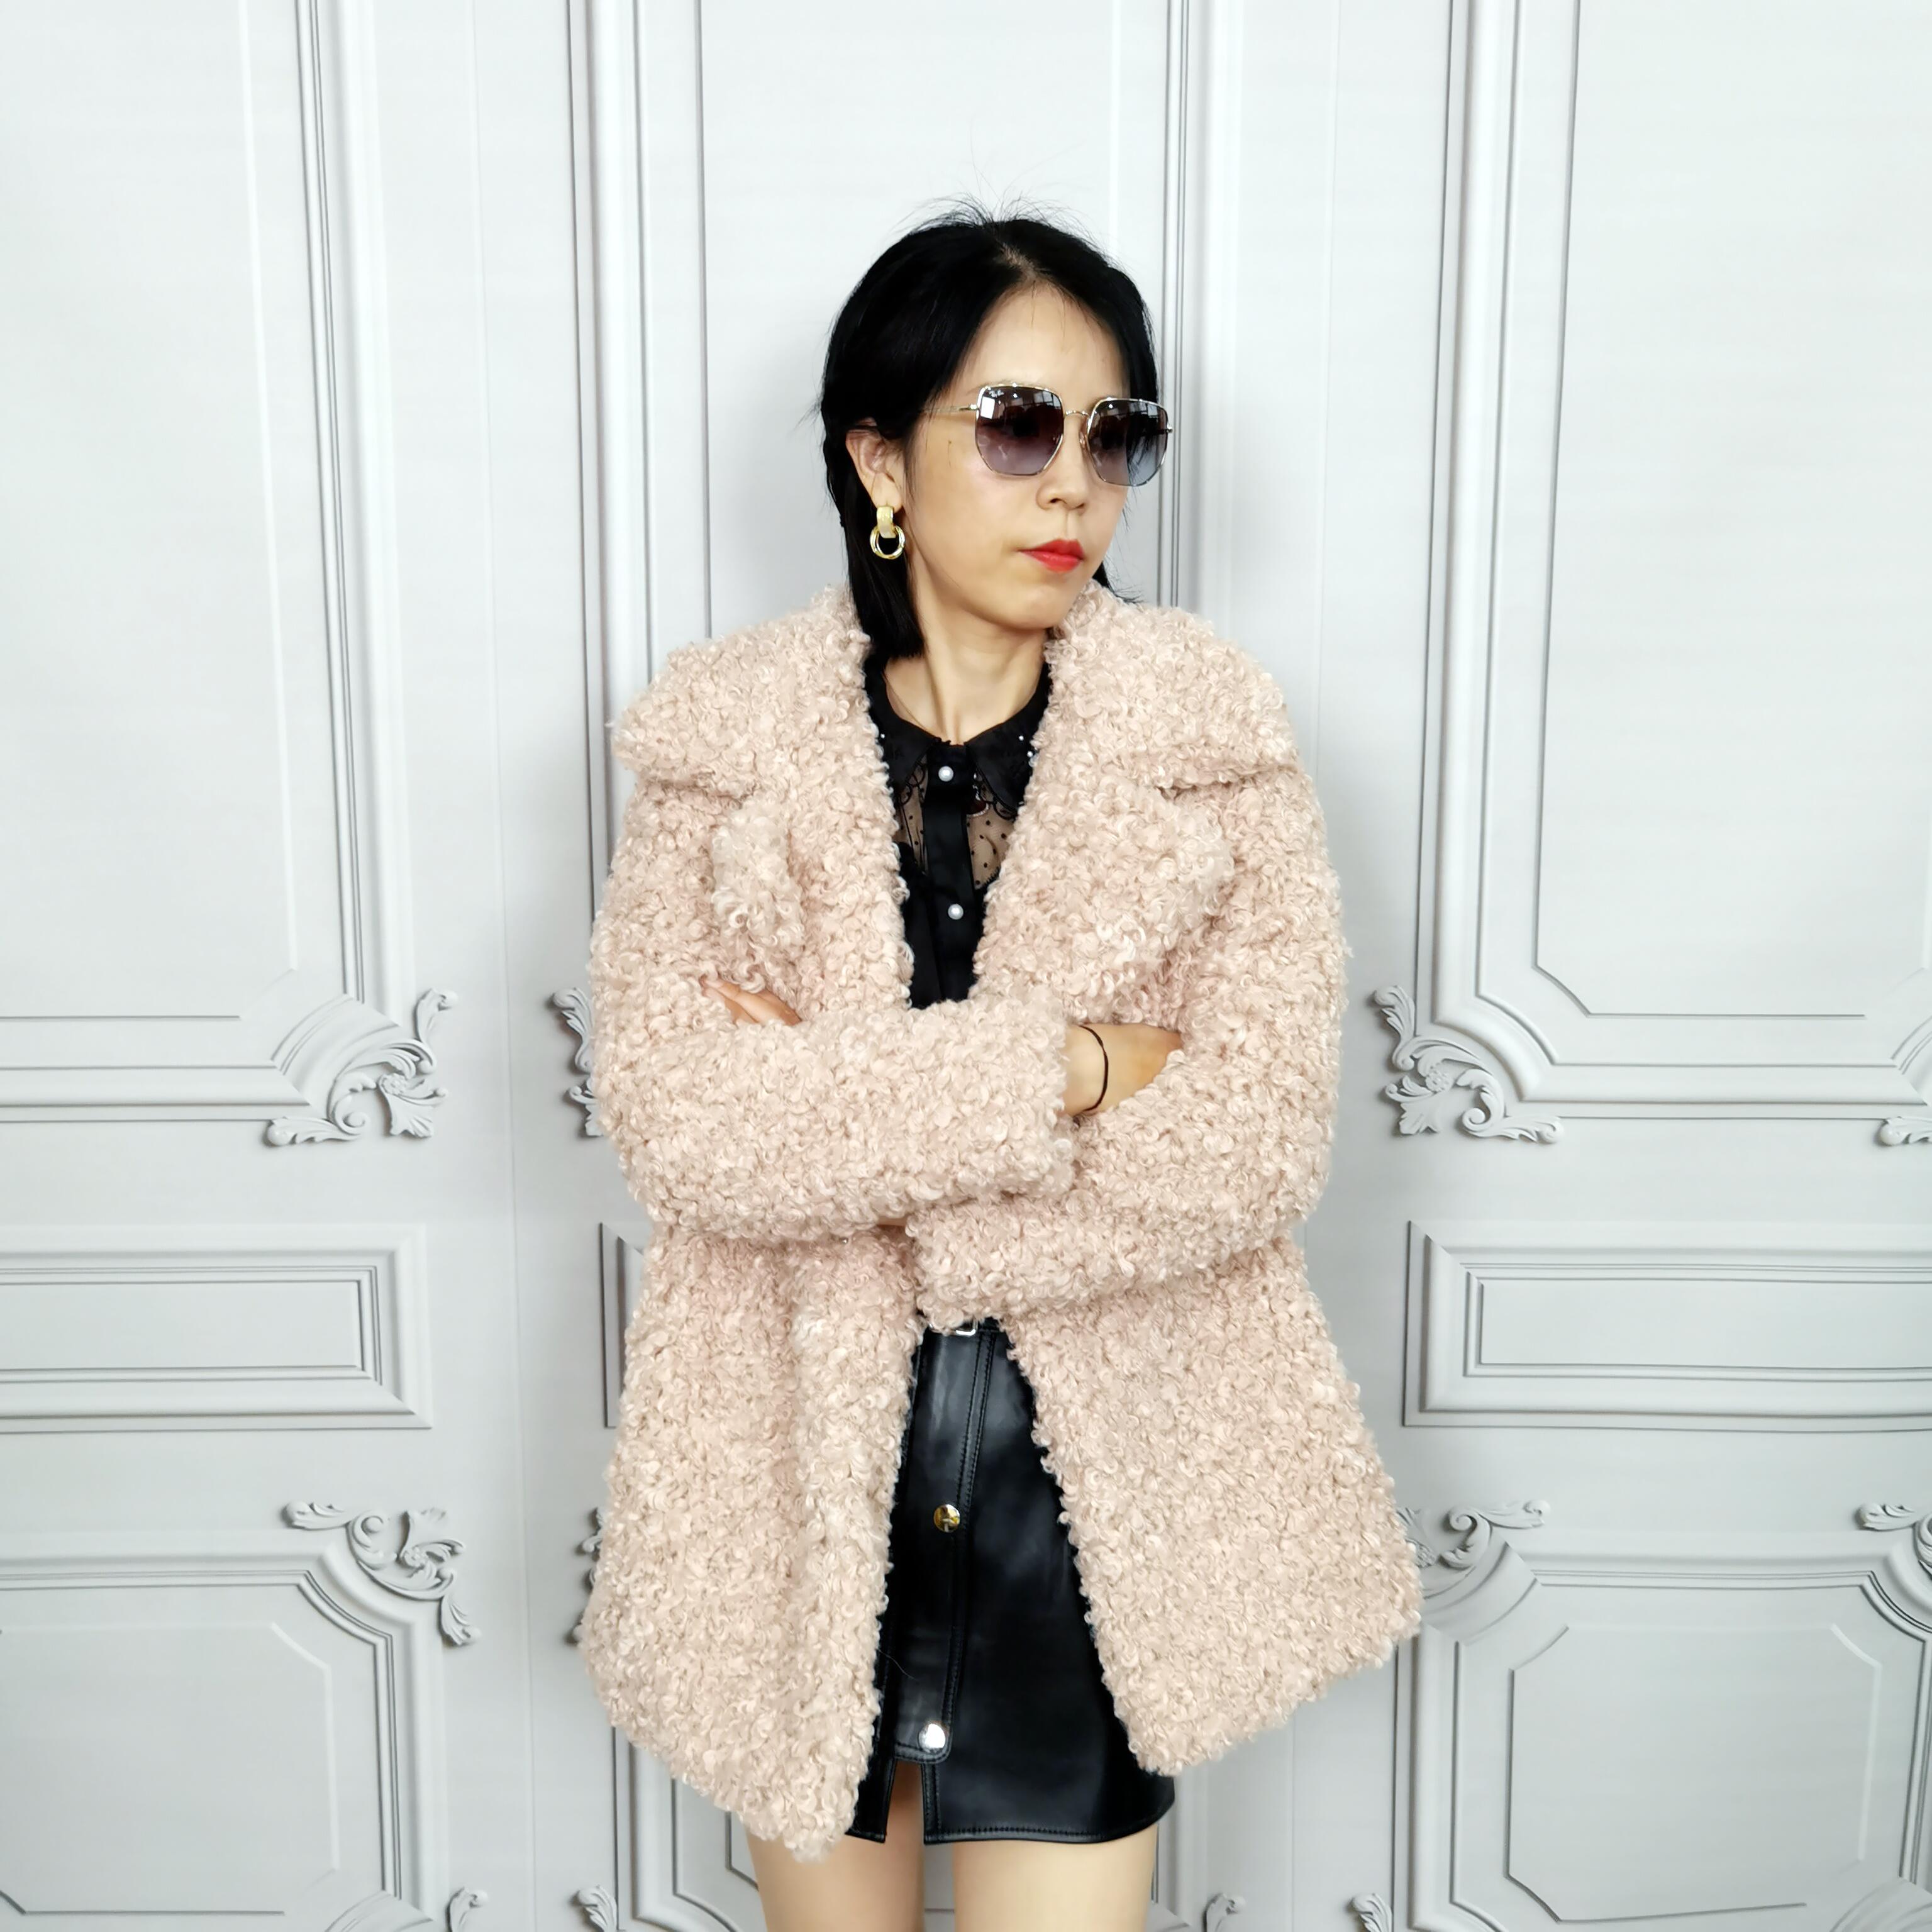 Turn-down Collar Design Furry curly Oversize trench coat faux fur trench